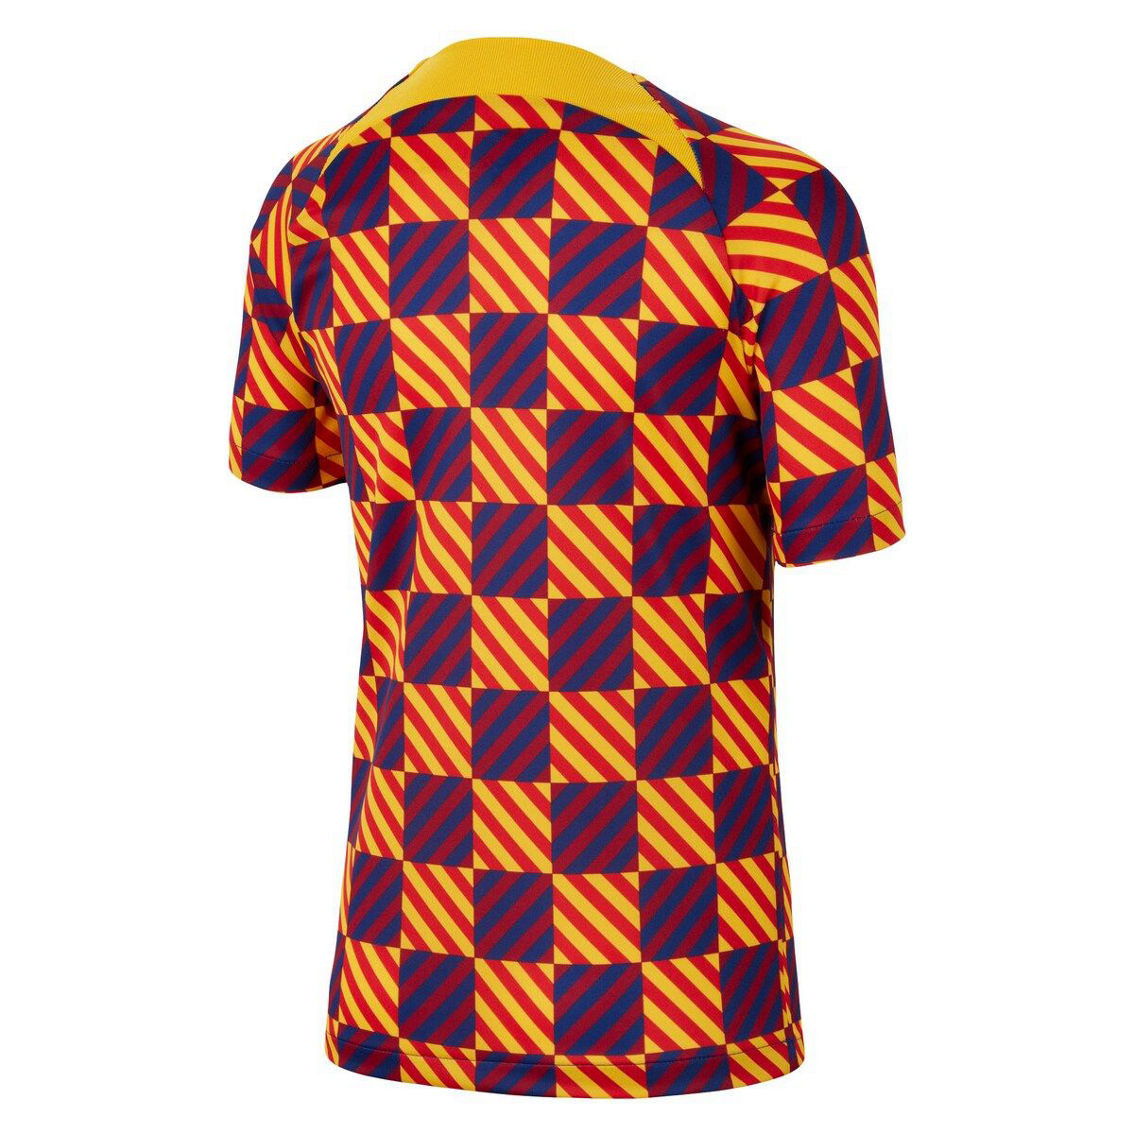 Nike Youth Yellow Barcelona Pre-Match Top - Image 4 of 4